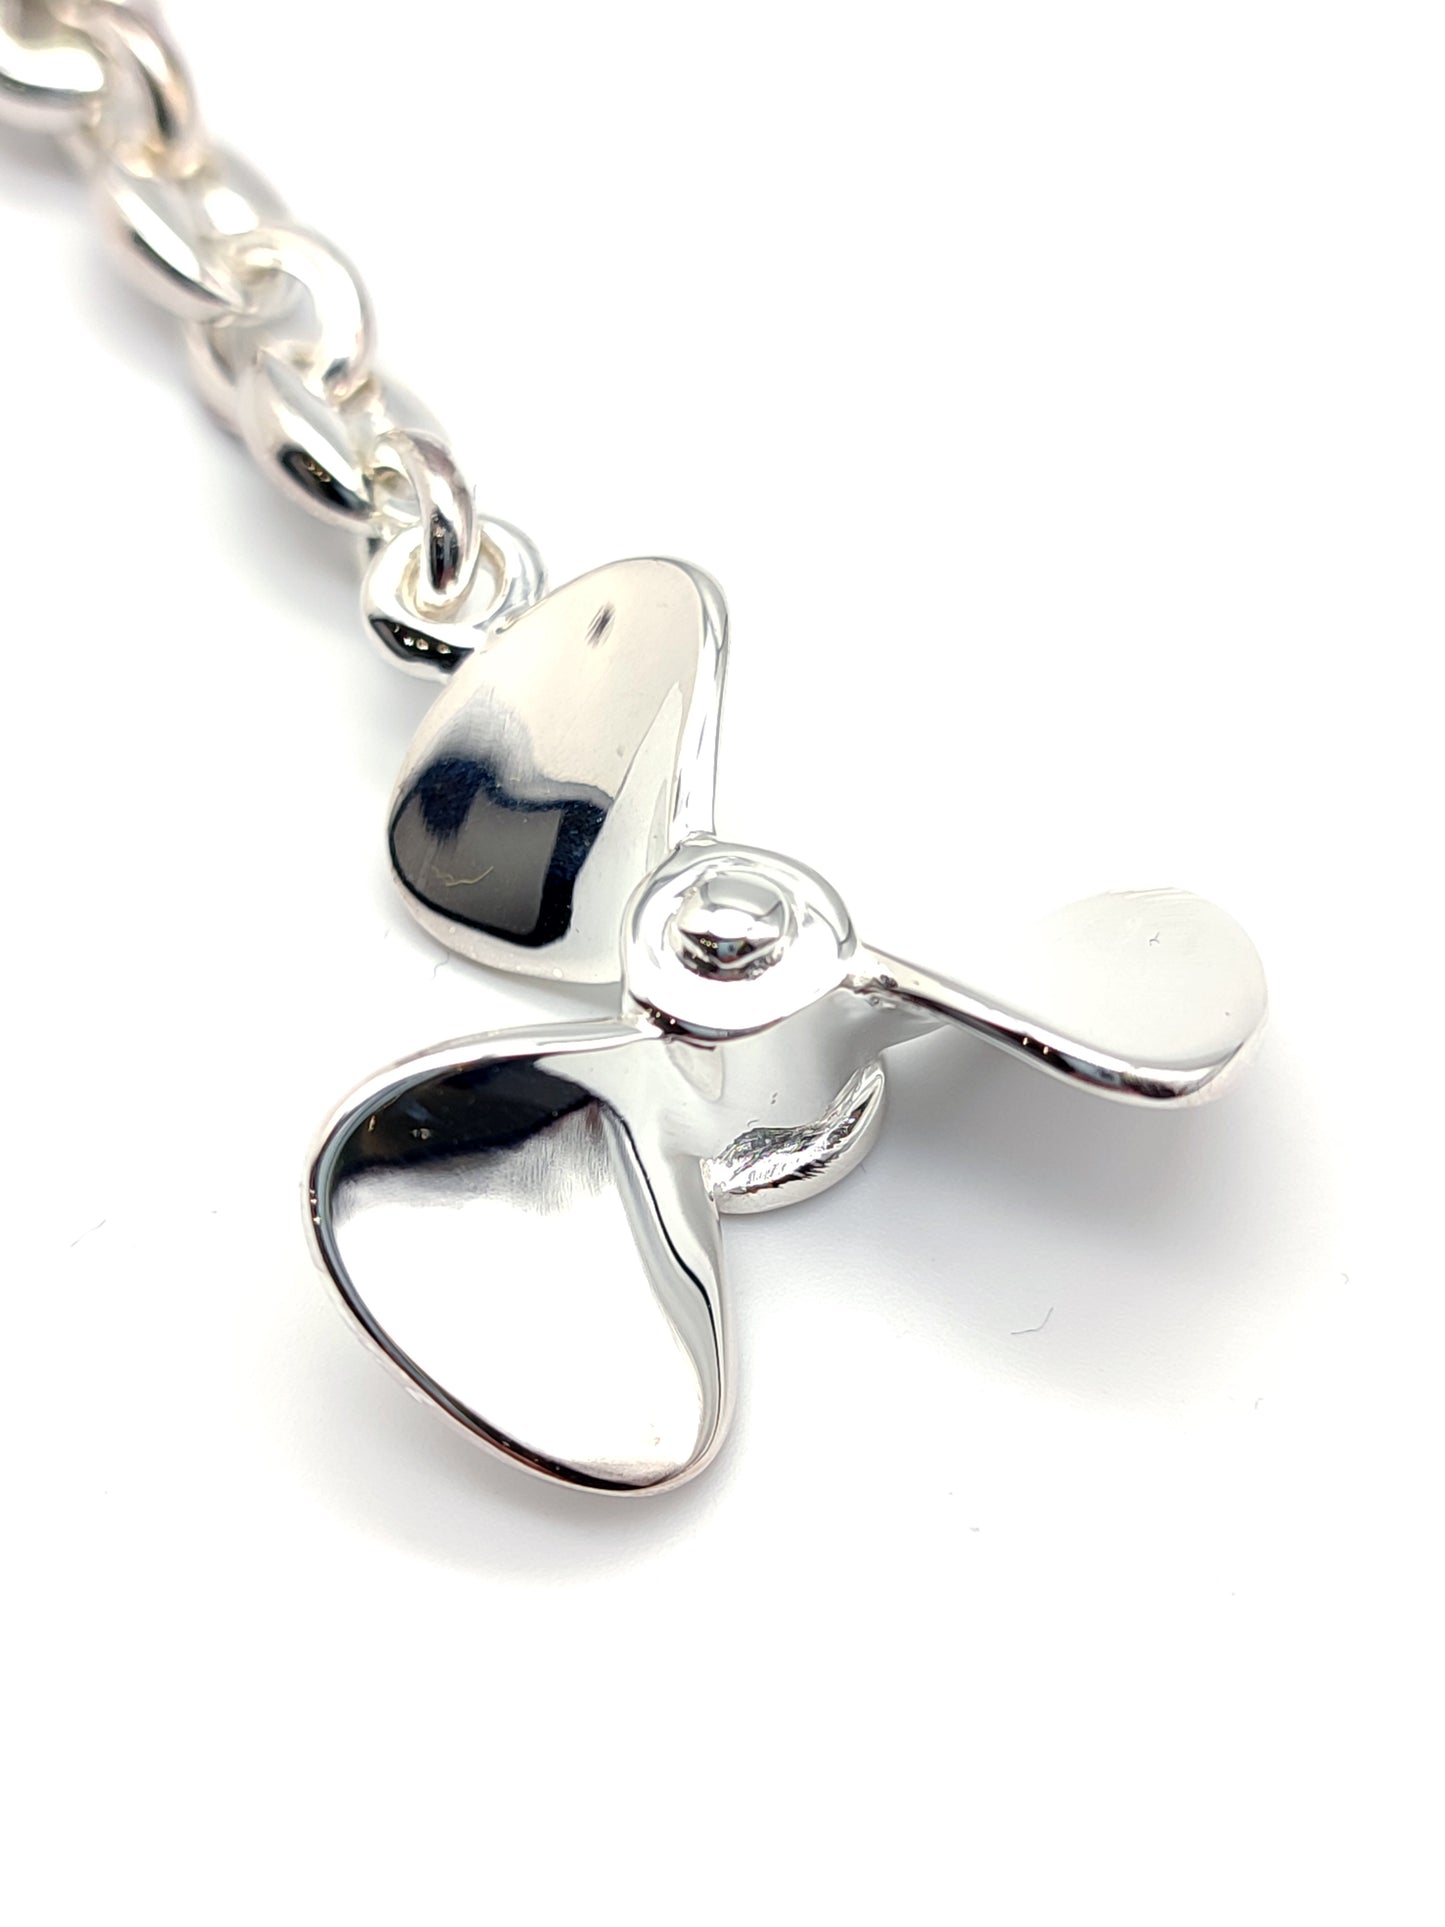 Solid silver key ring with propeller